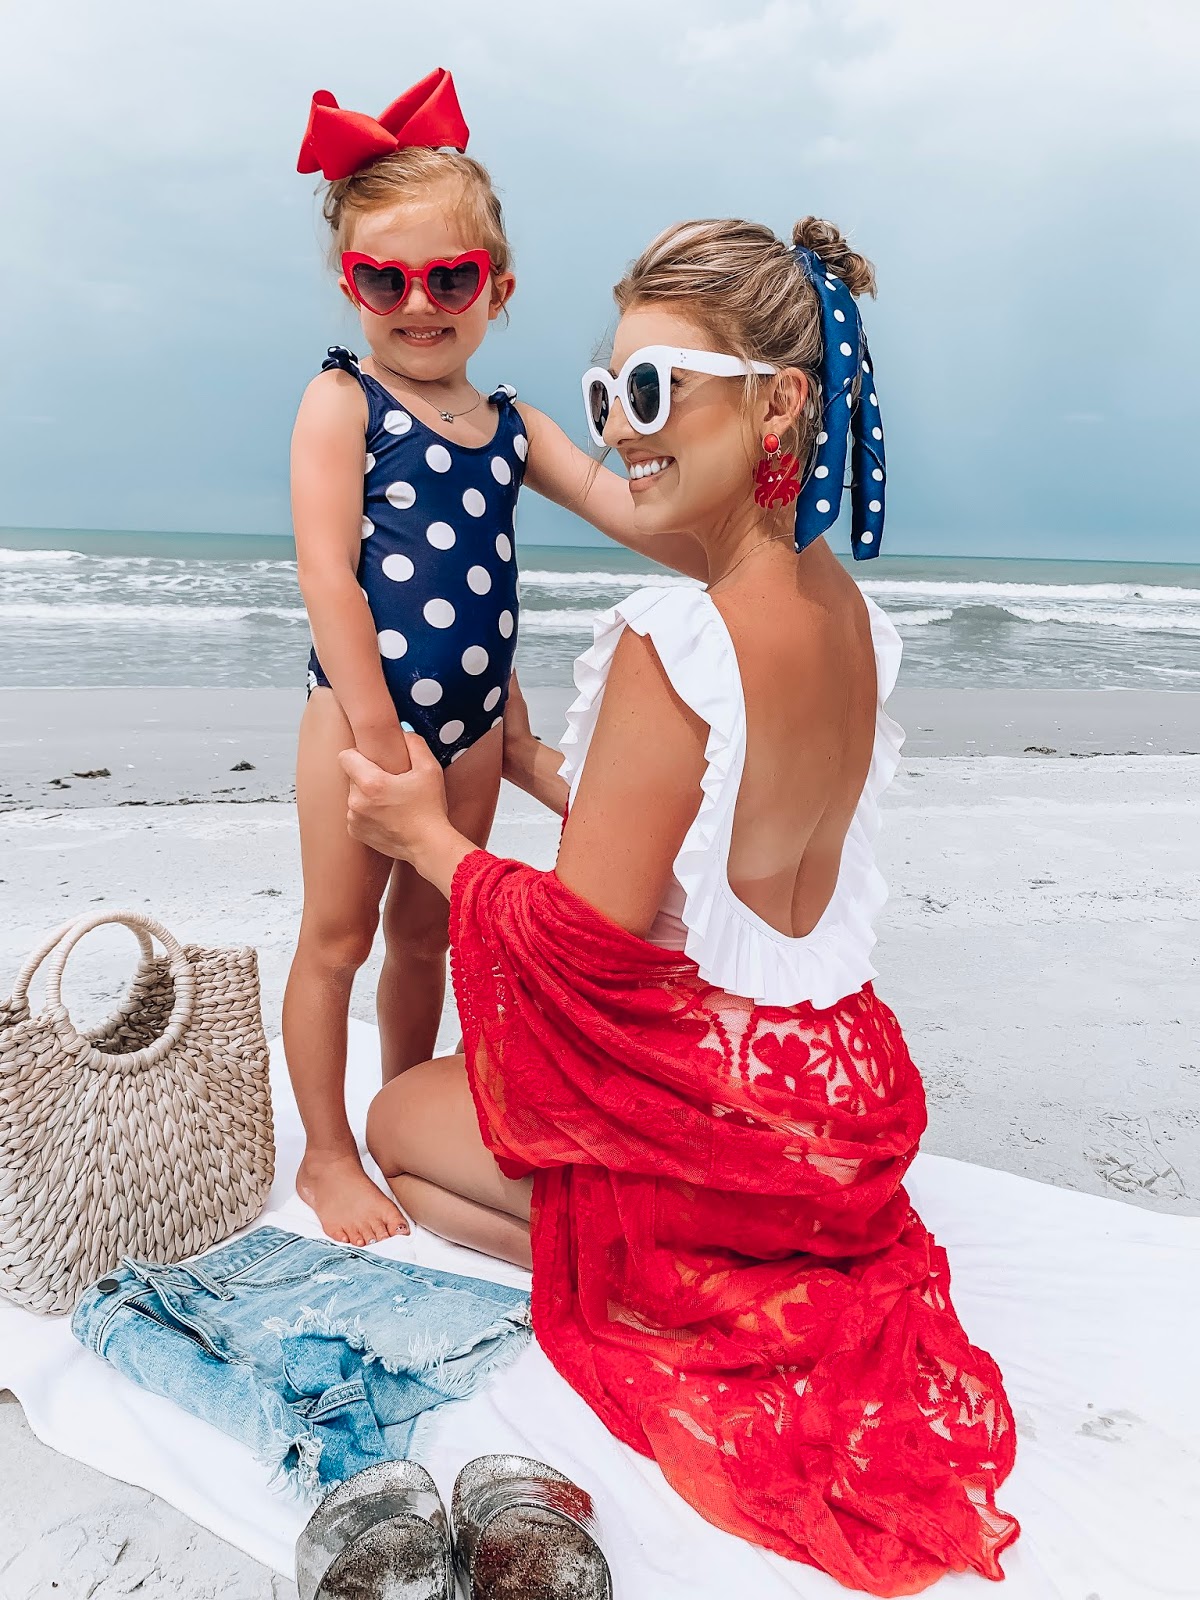 $40 Target Ruffle Back Swimsuit: Patriotic Styling, Red, White & Blue/White Polka Dots - Something Delightful 